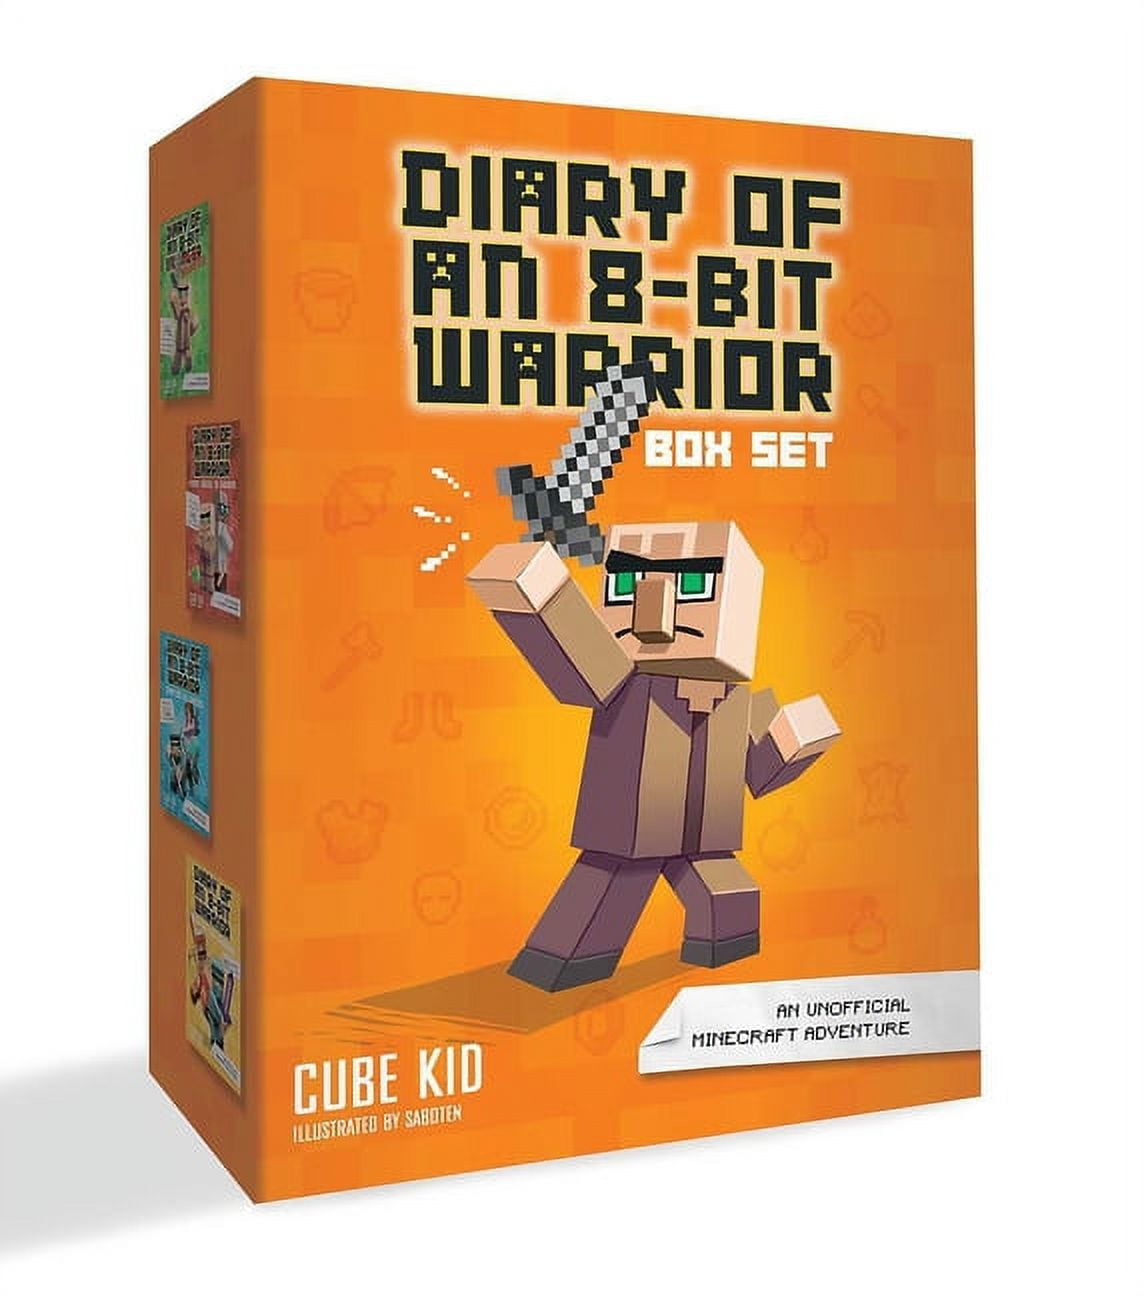 N407 diary of a minecraft